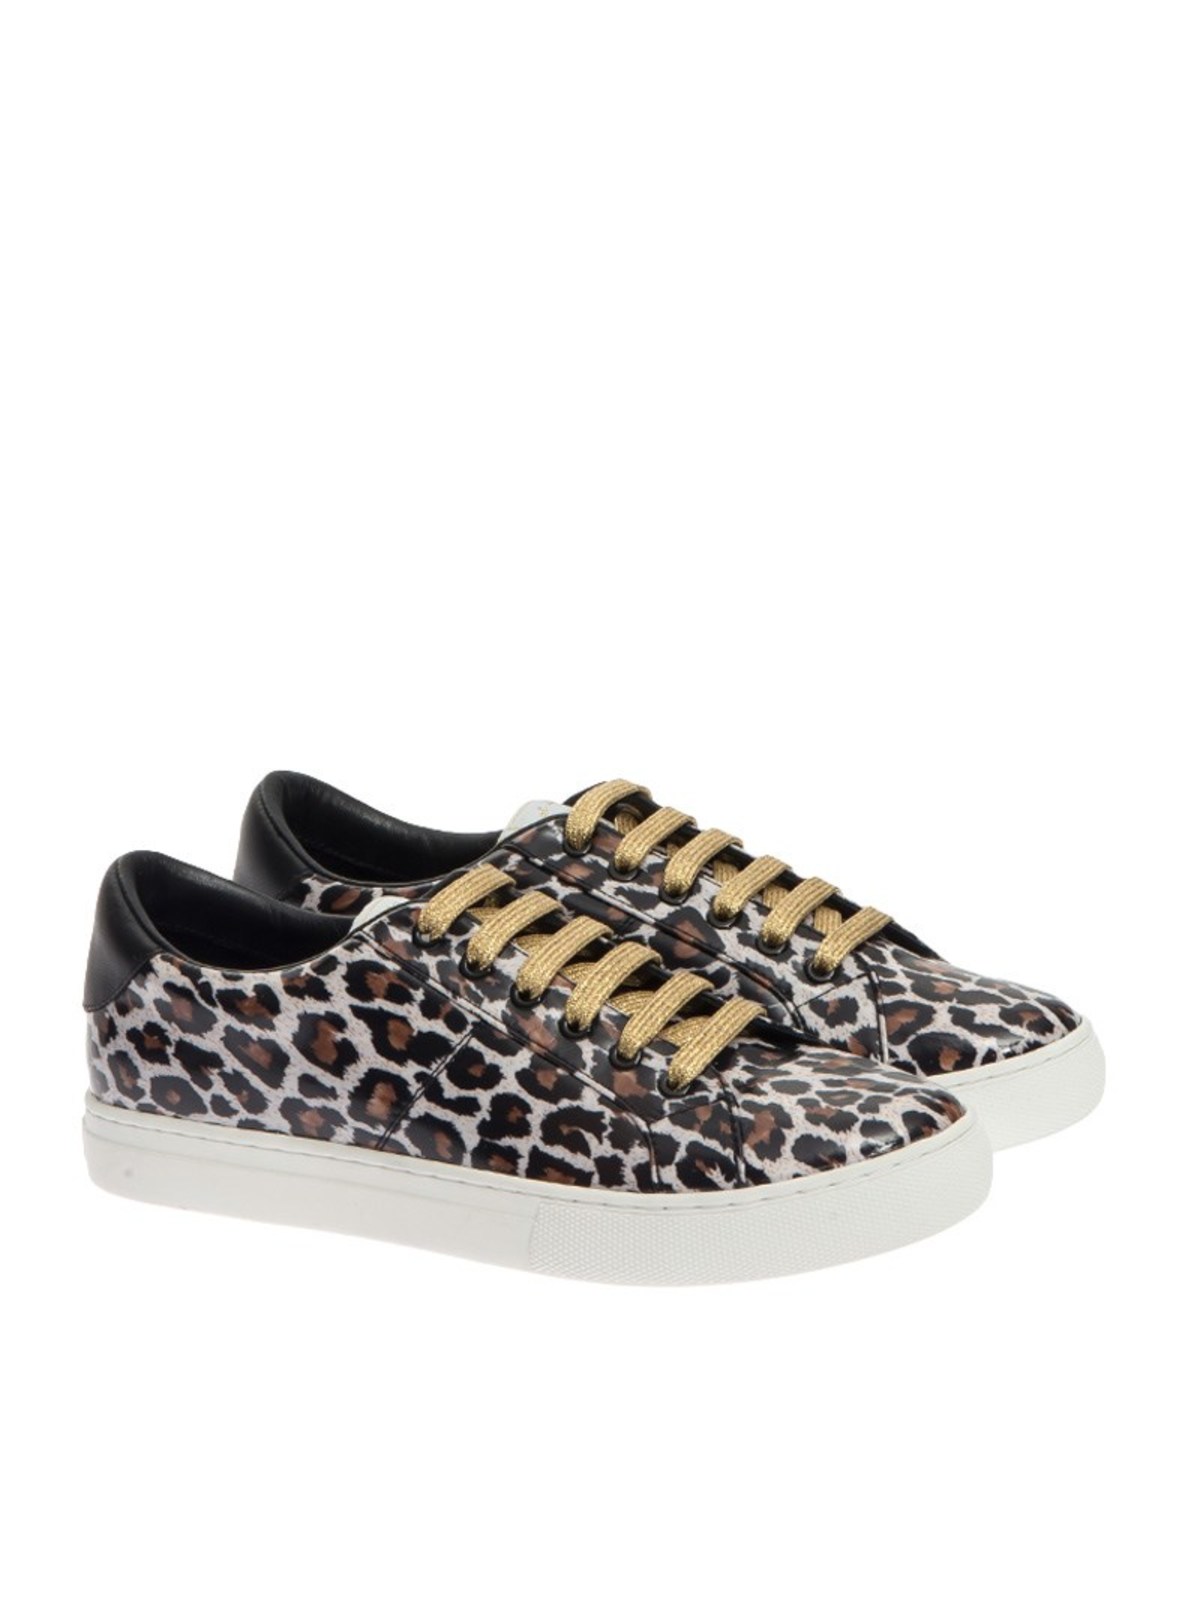 Trainers Marc Jacobs - Empire Lace sneakers - M9001684161 | iKRIX.com